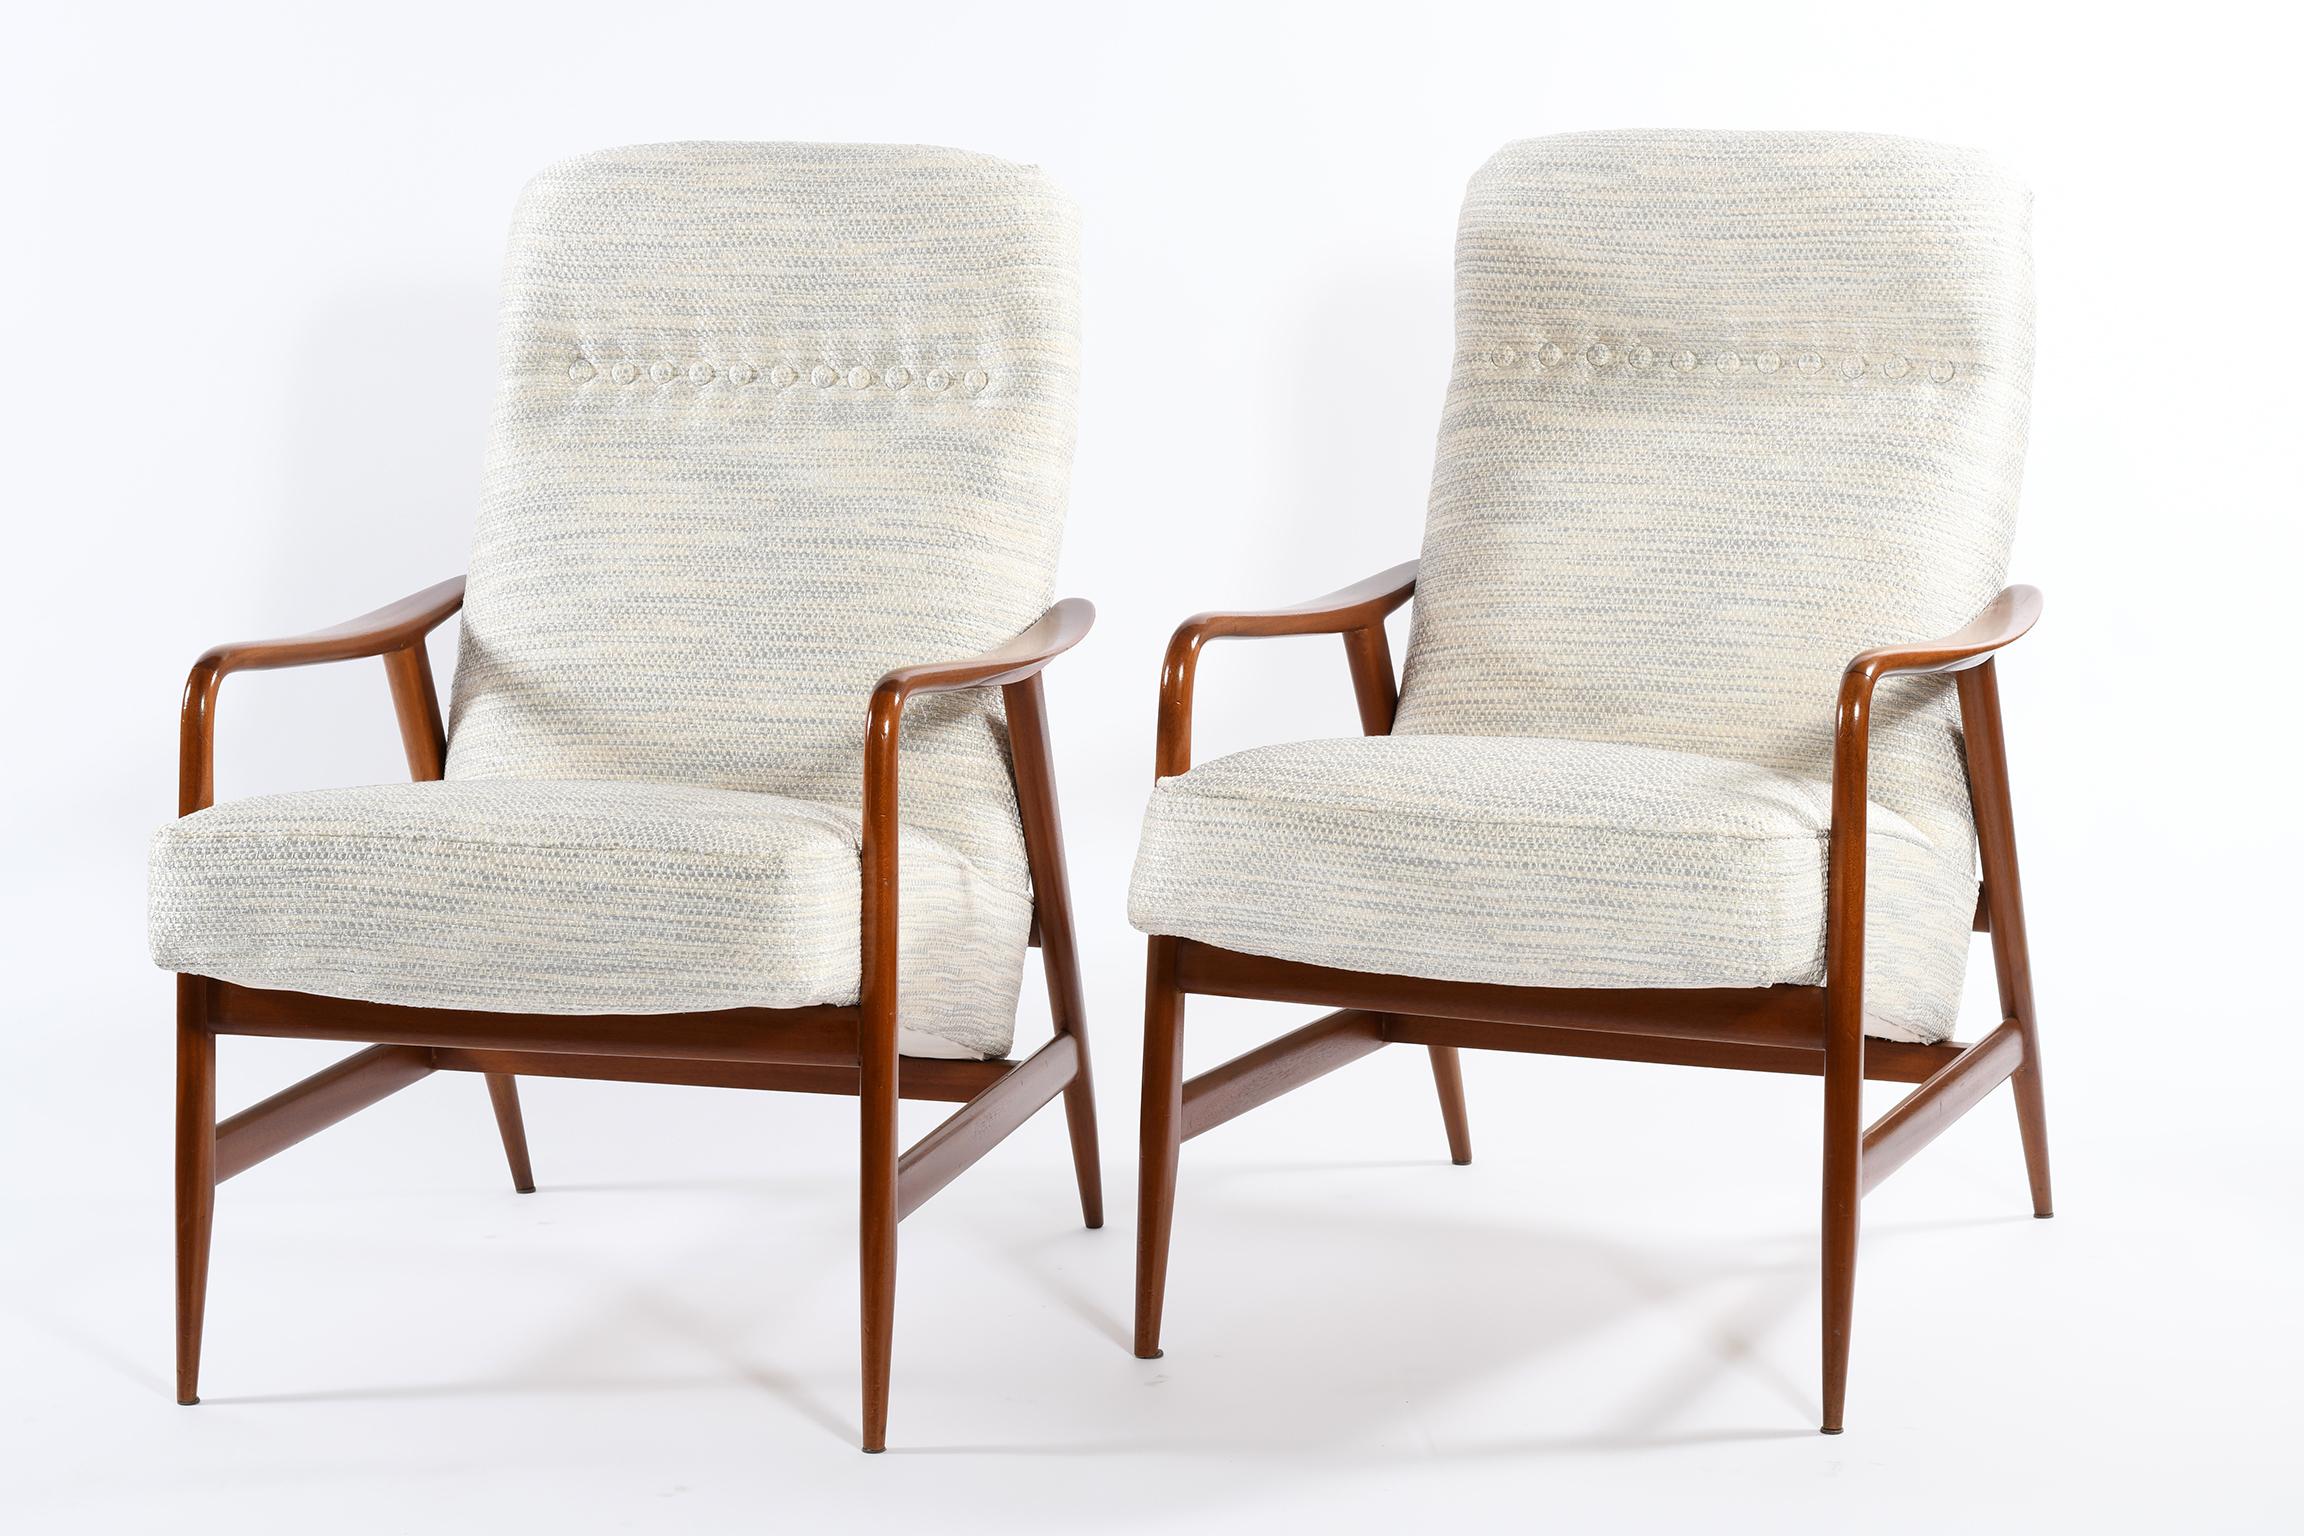 Italian Mid Century solid teak wood structures pair of armchairs, Italian 1950's production By Framar based on the Contur model by Alf Svensson, the small size of this seat makes it suitable for various environments from the living room to the